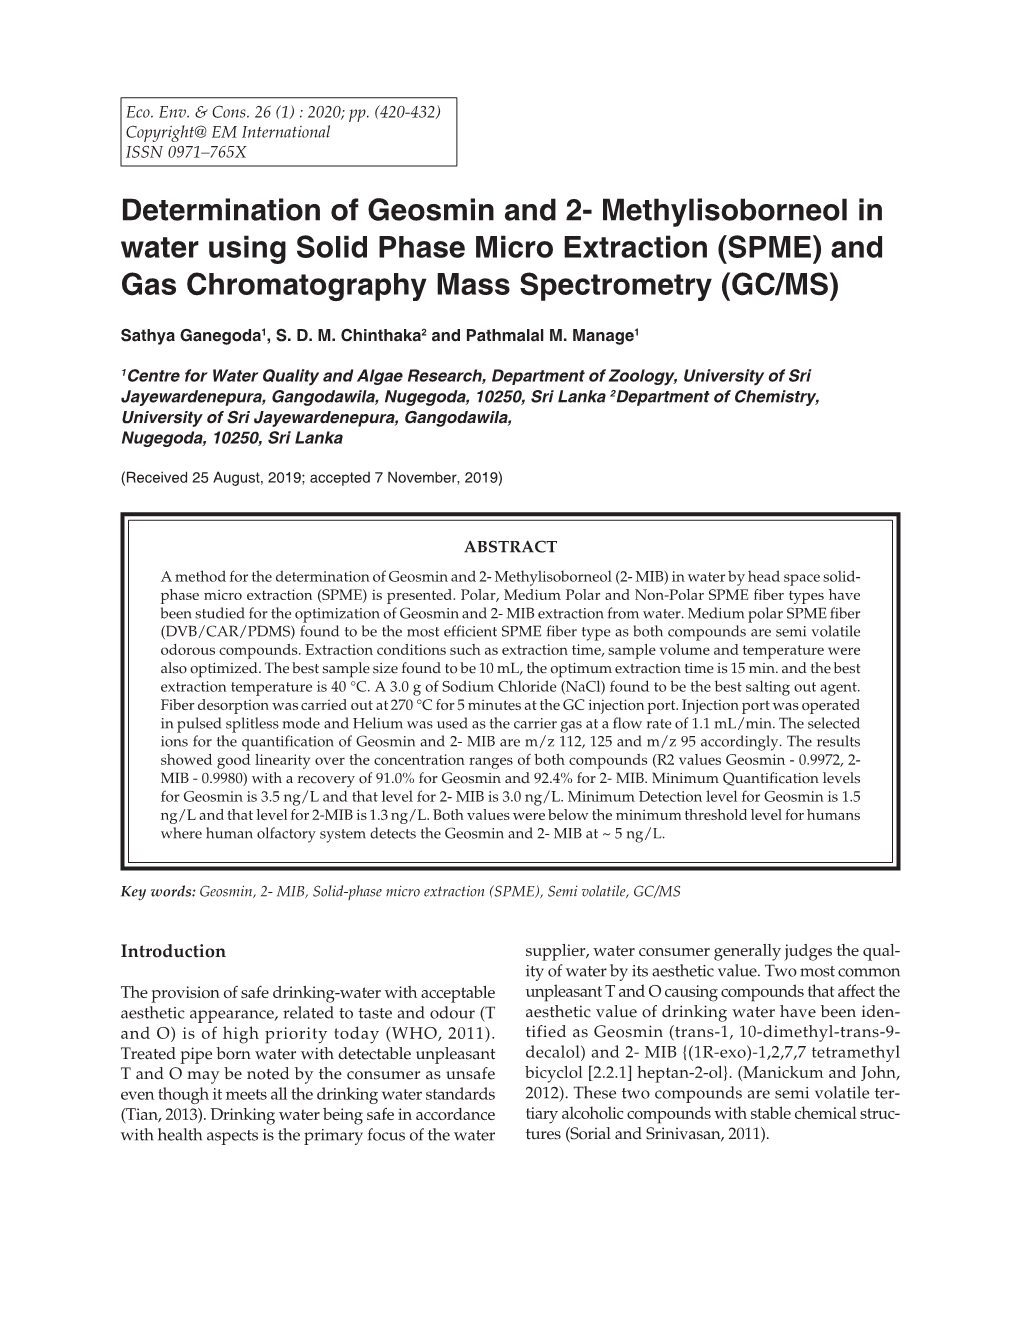 Determination of Geosmin and 2- Methylisoborneol in Water Using Solid Phase Micro Extraction (SPME) and Gas Chromatography Mass Spectrometry (GC/MS)